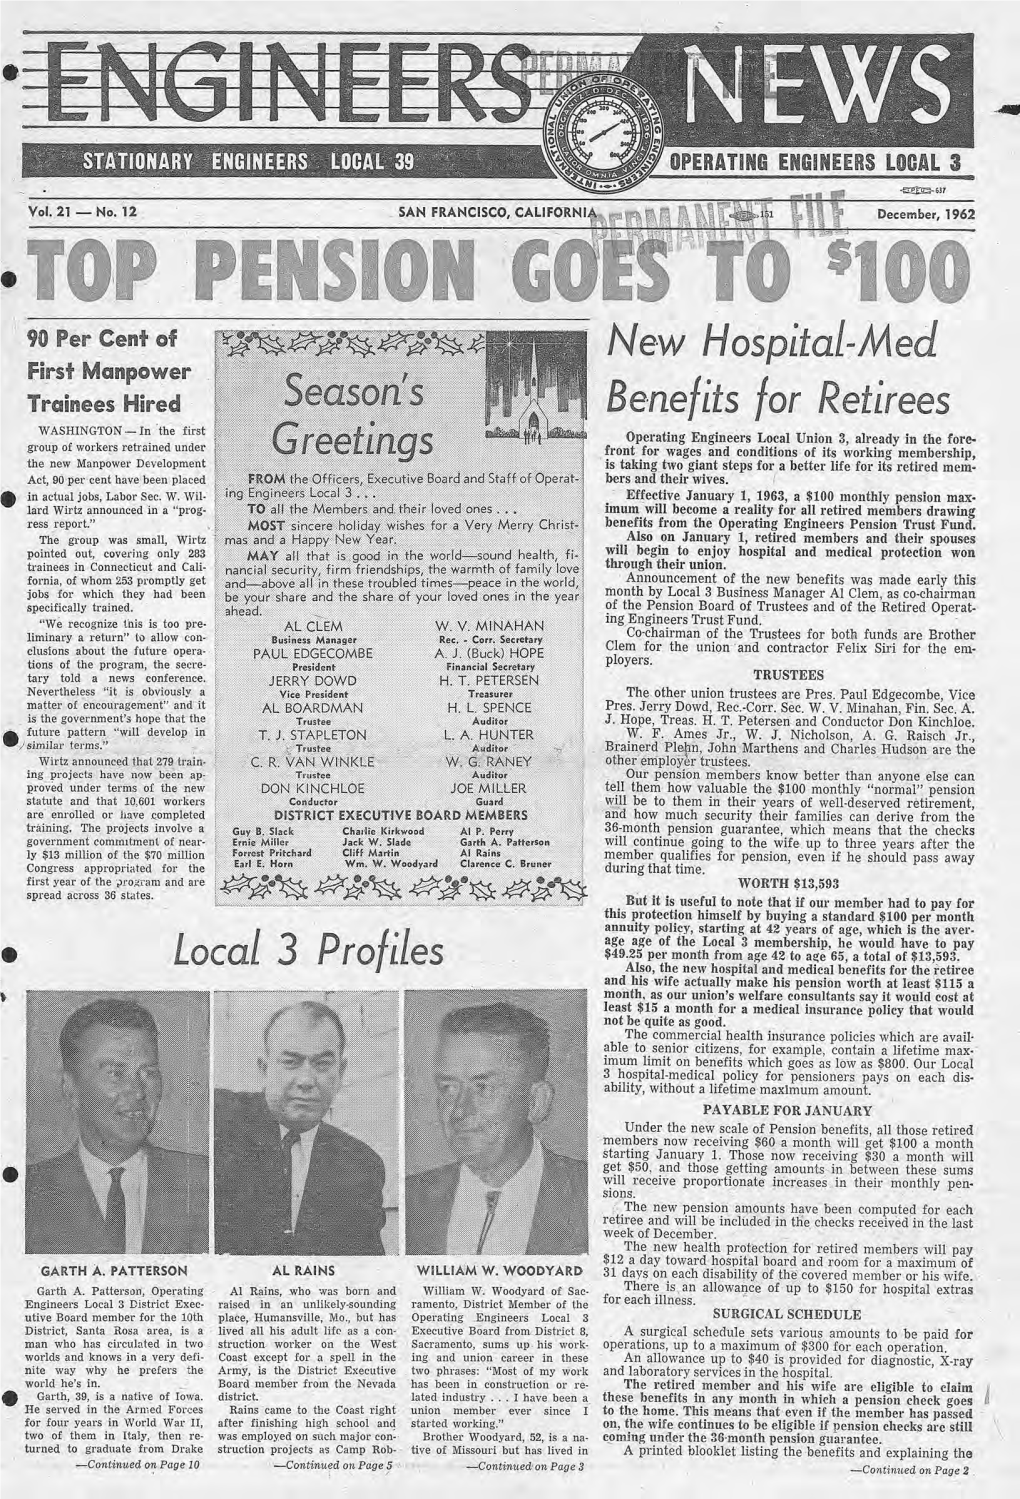 December, 1962 ENGIN[ERS NEWS Page Three • Ef Ief F Rt Ert1fic T Presented at Dinner Meeting in Oakland